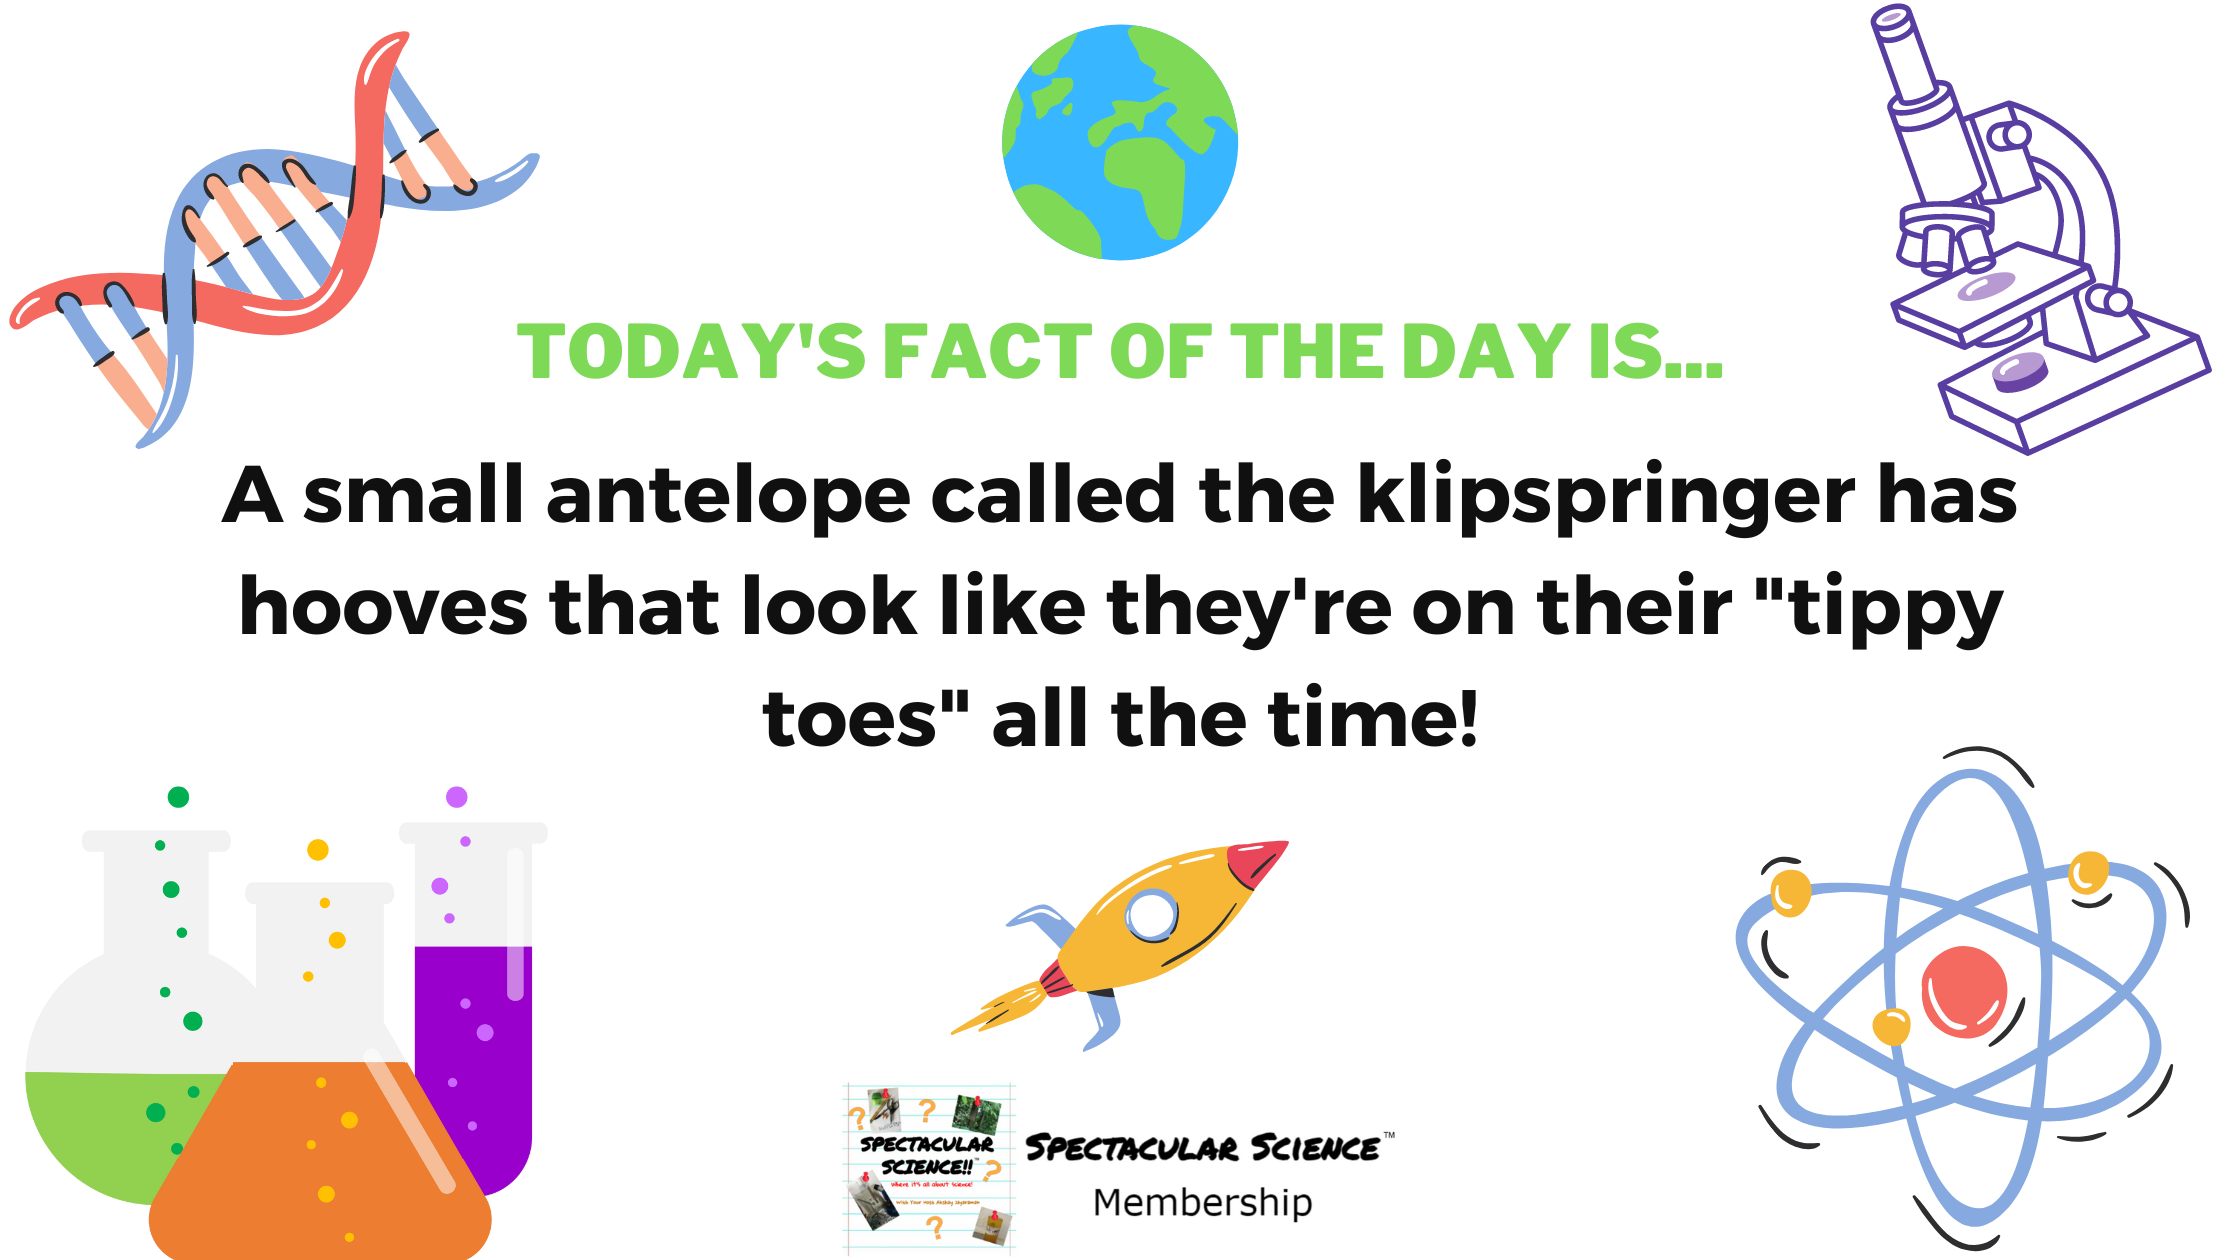 Fact of the Day Image November 17th